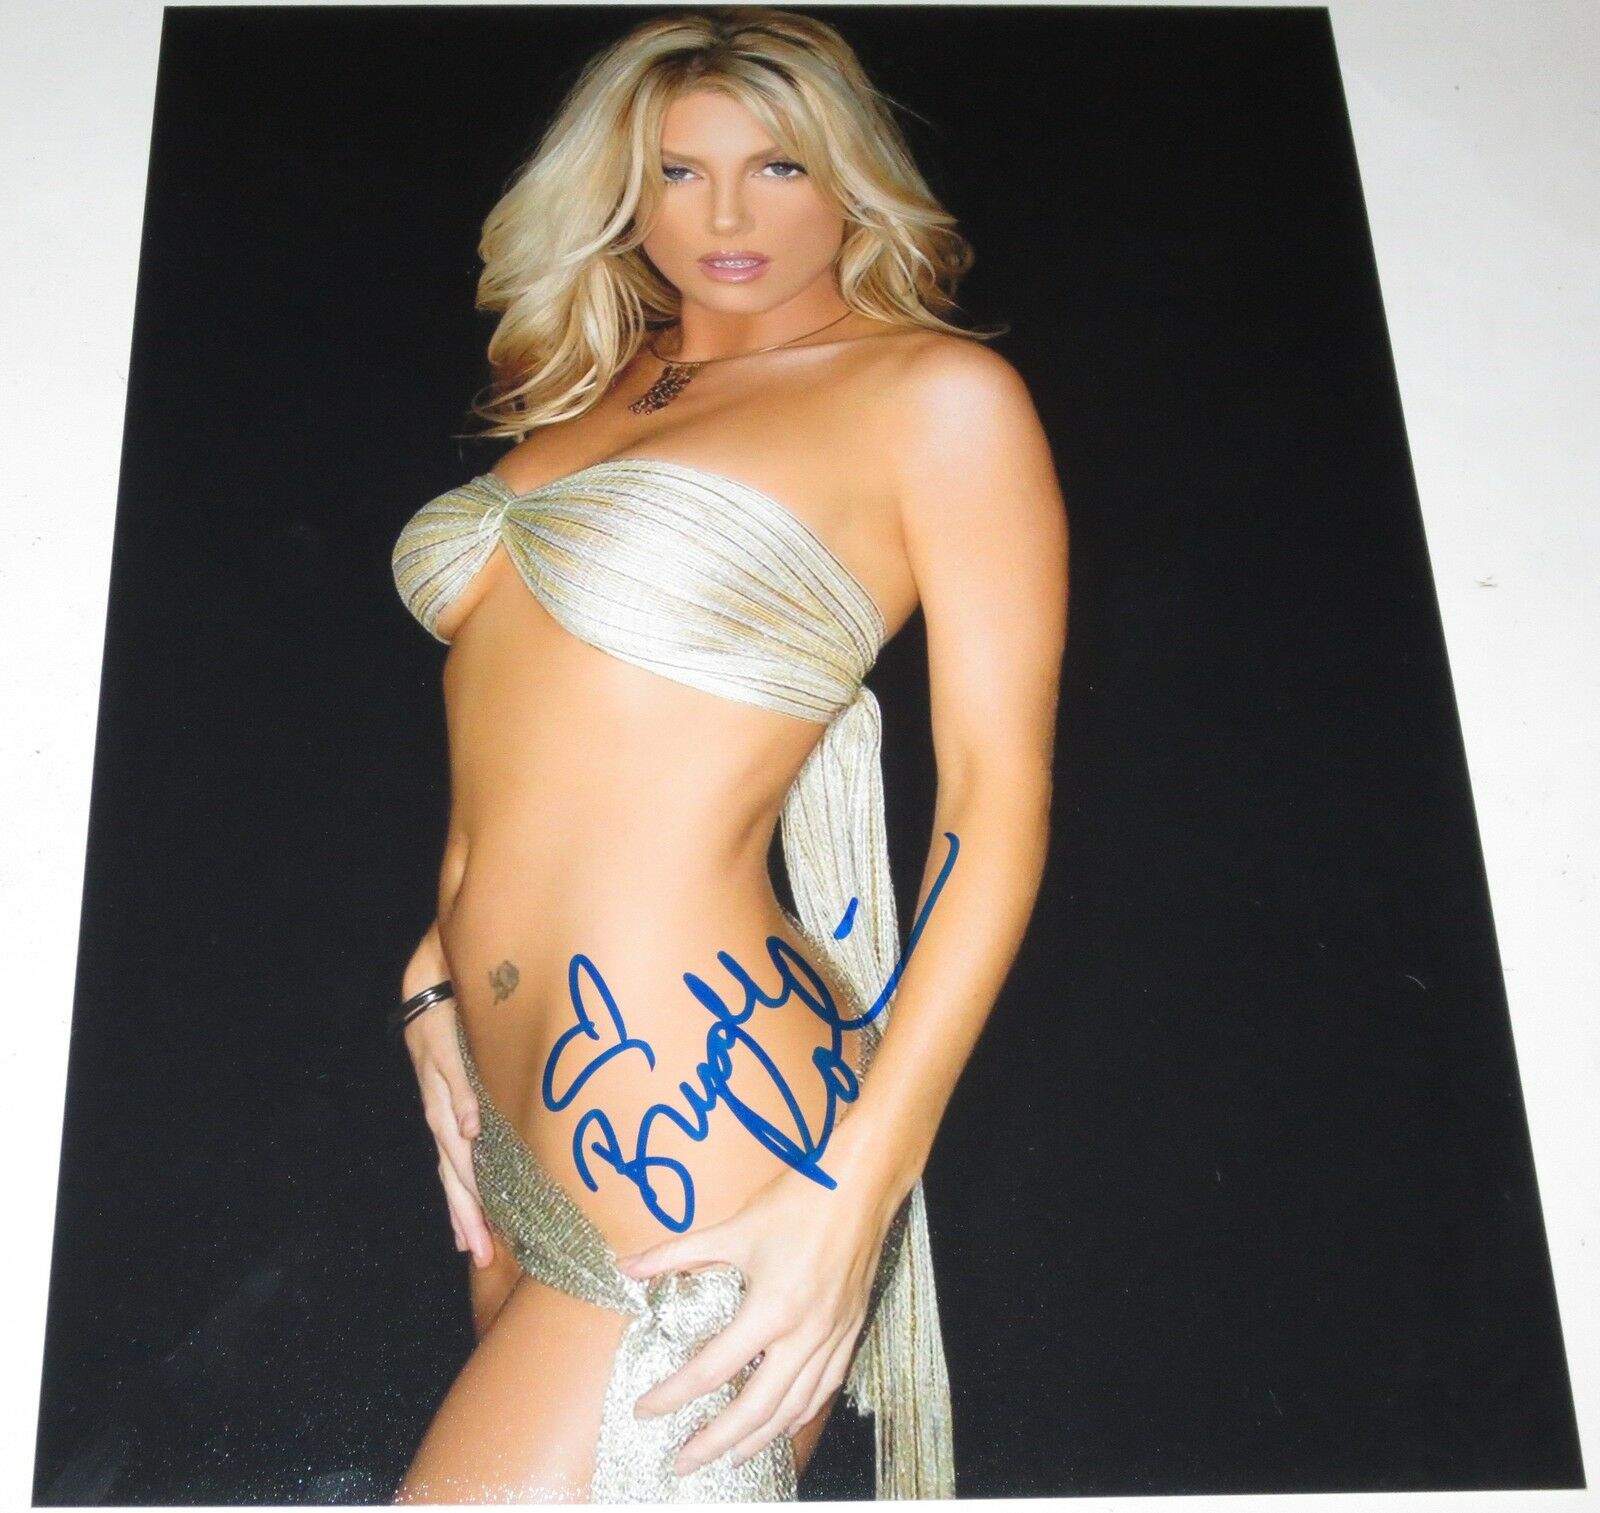 BRANDE RODERICK SEXY SIGNED X PHOTO HOT AUTOGRAPH BAYWATCH PLAYbabe COA B Collectible